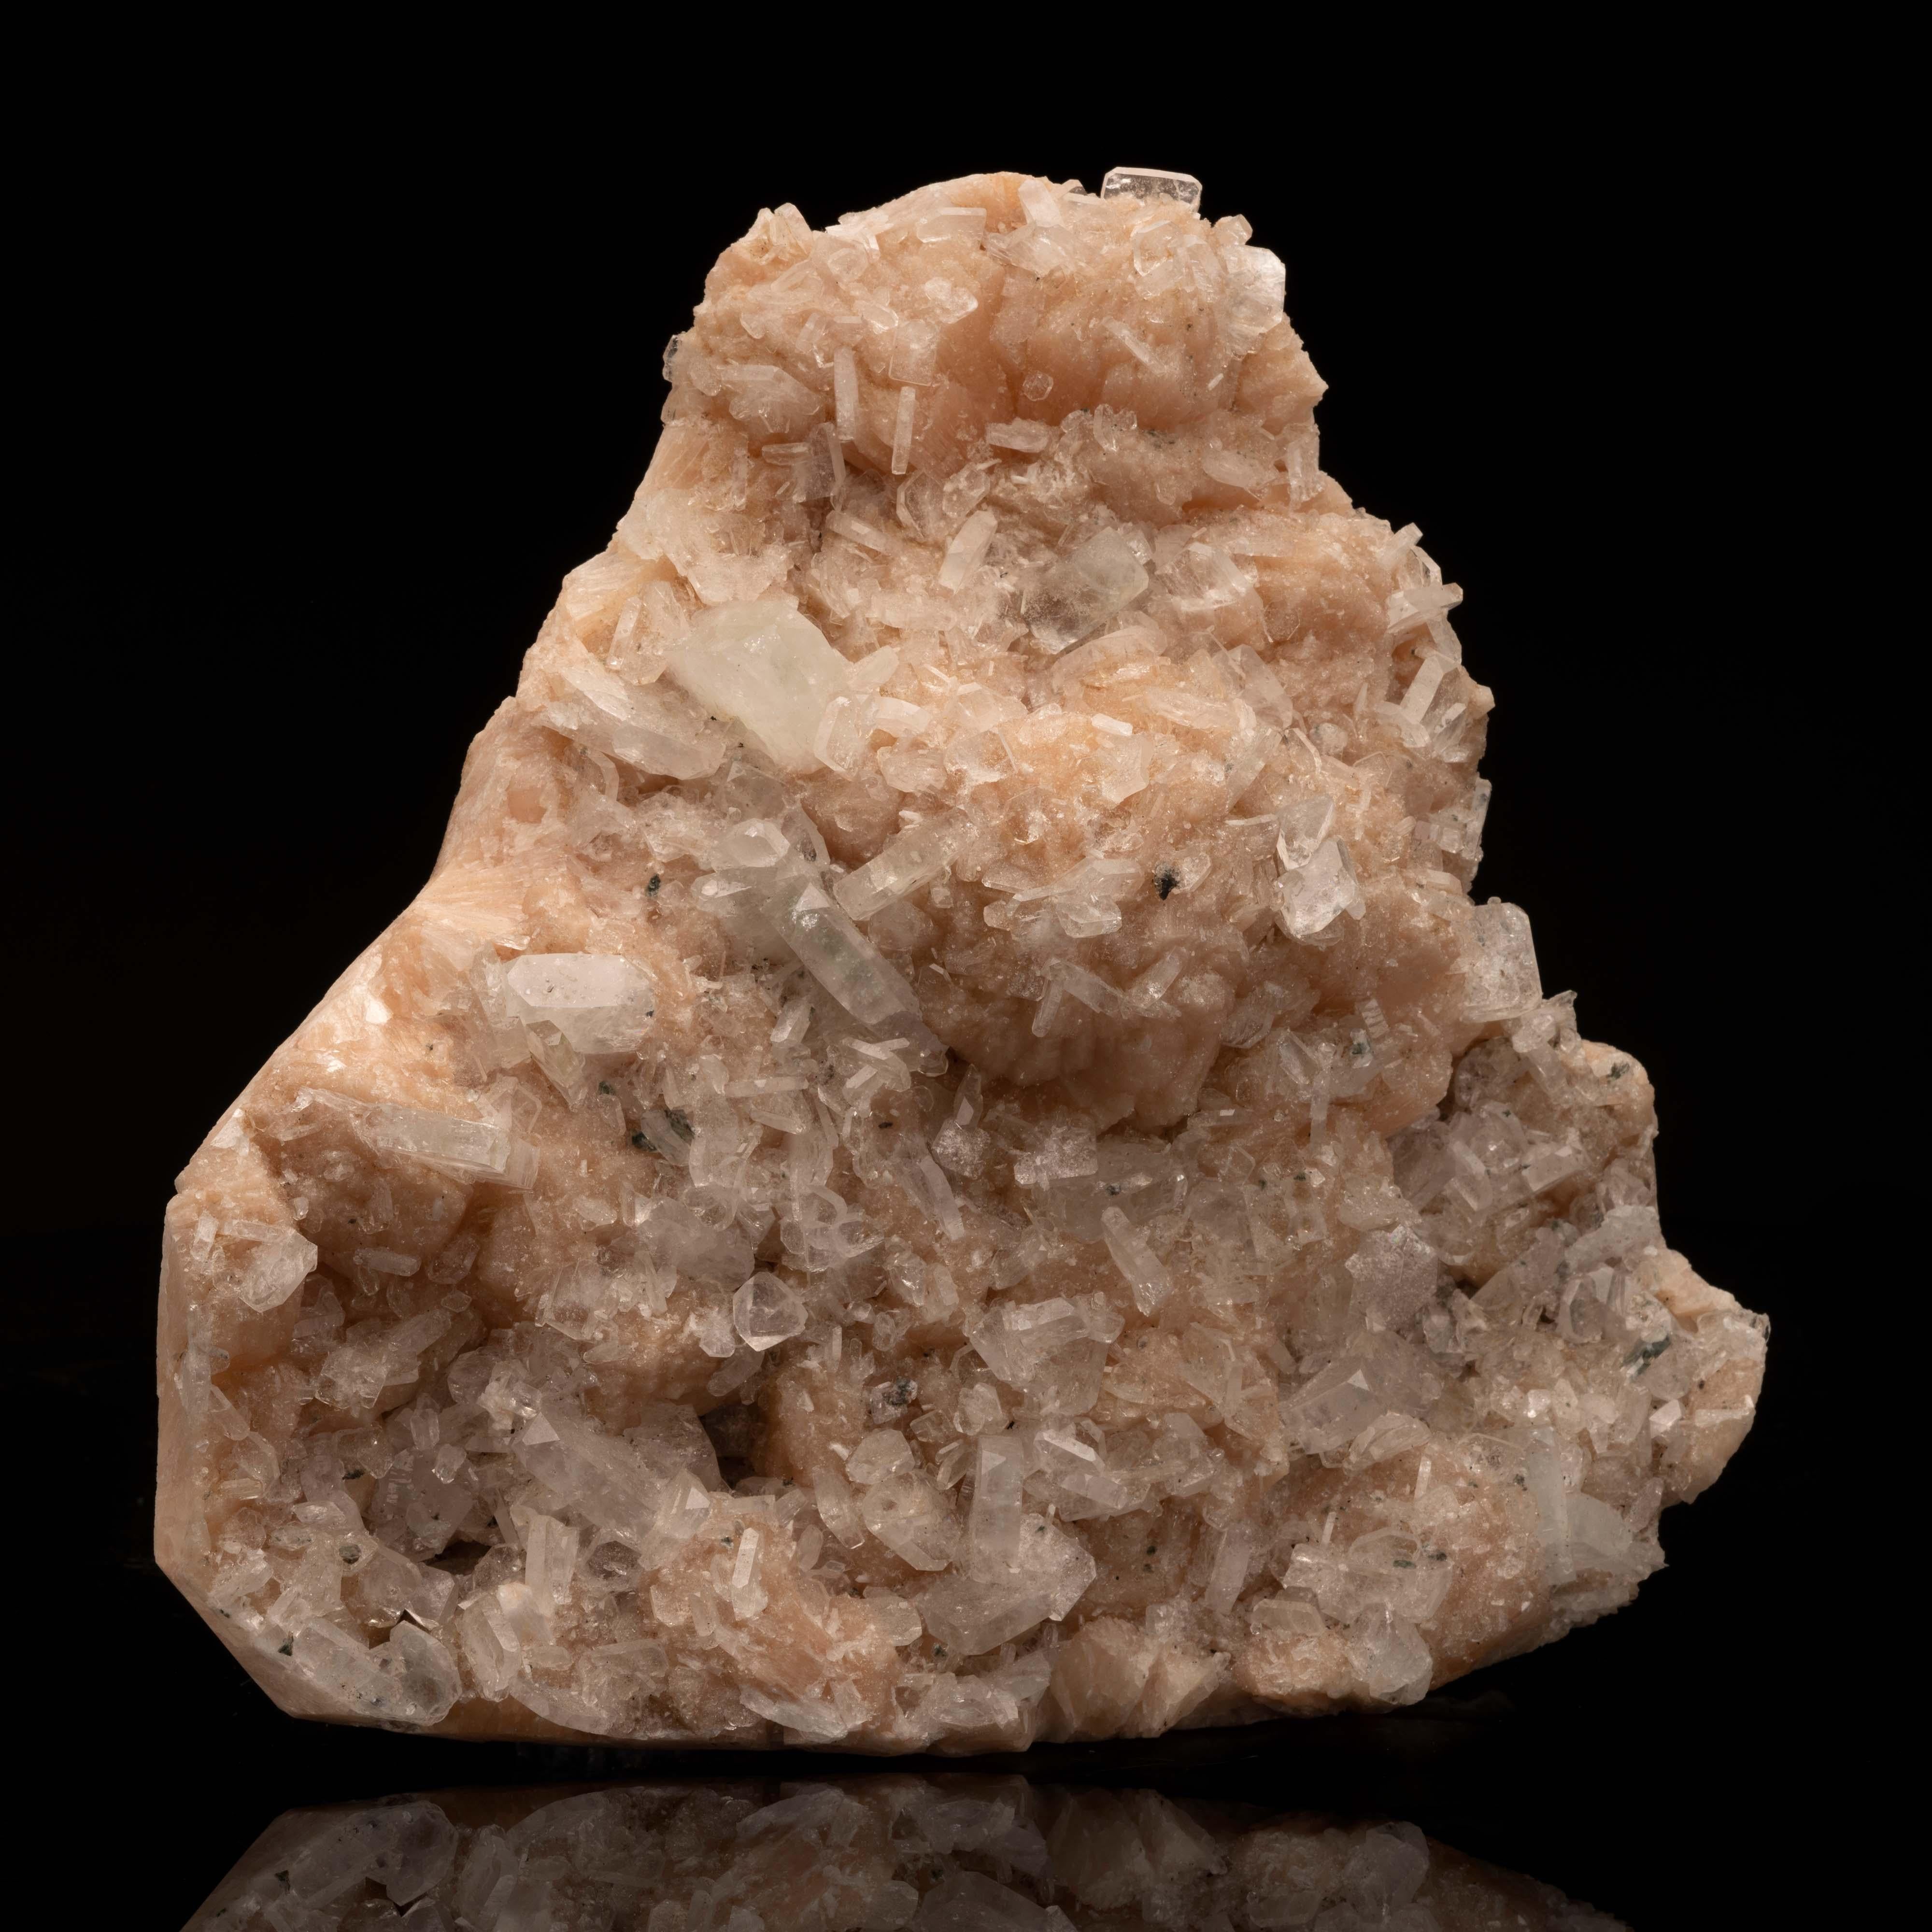 This large and textural piece features an abundance of waxy peach stilbite growing with incredibly lustrous and clear apophyllite crystals on top for a delicately-hued arrangement sure to add fascination to your cabinet or living room. The opaque